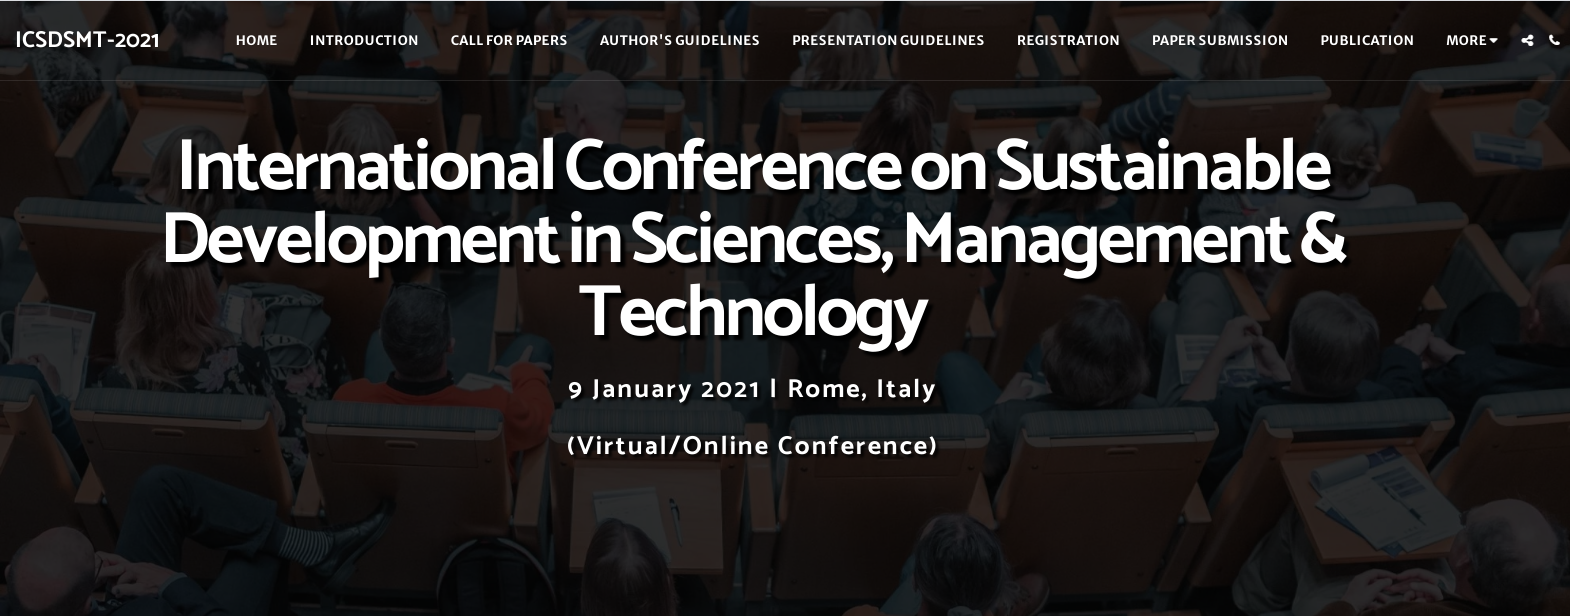 International Conference on Sustainable Development in Sciences, Management & Technology (ICSDSMT-2021), Online Conference, Veneto, Italy